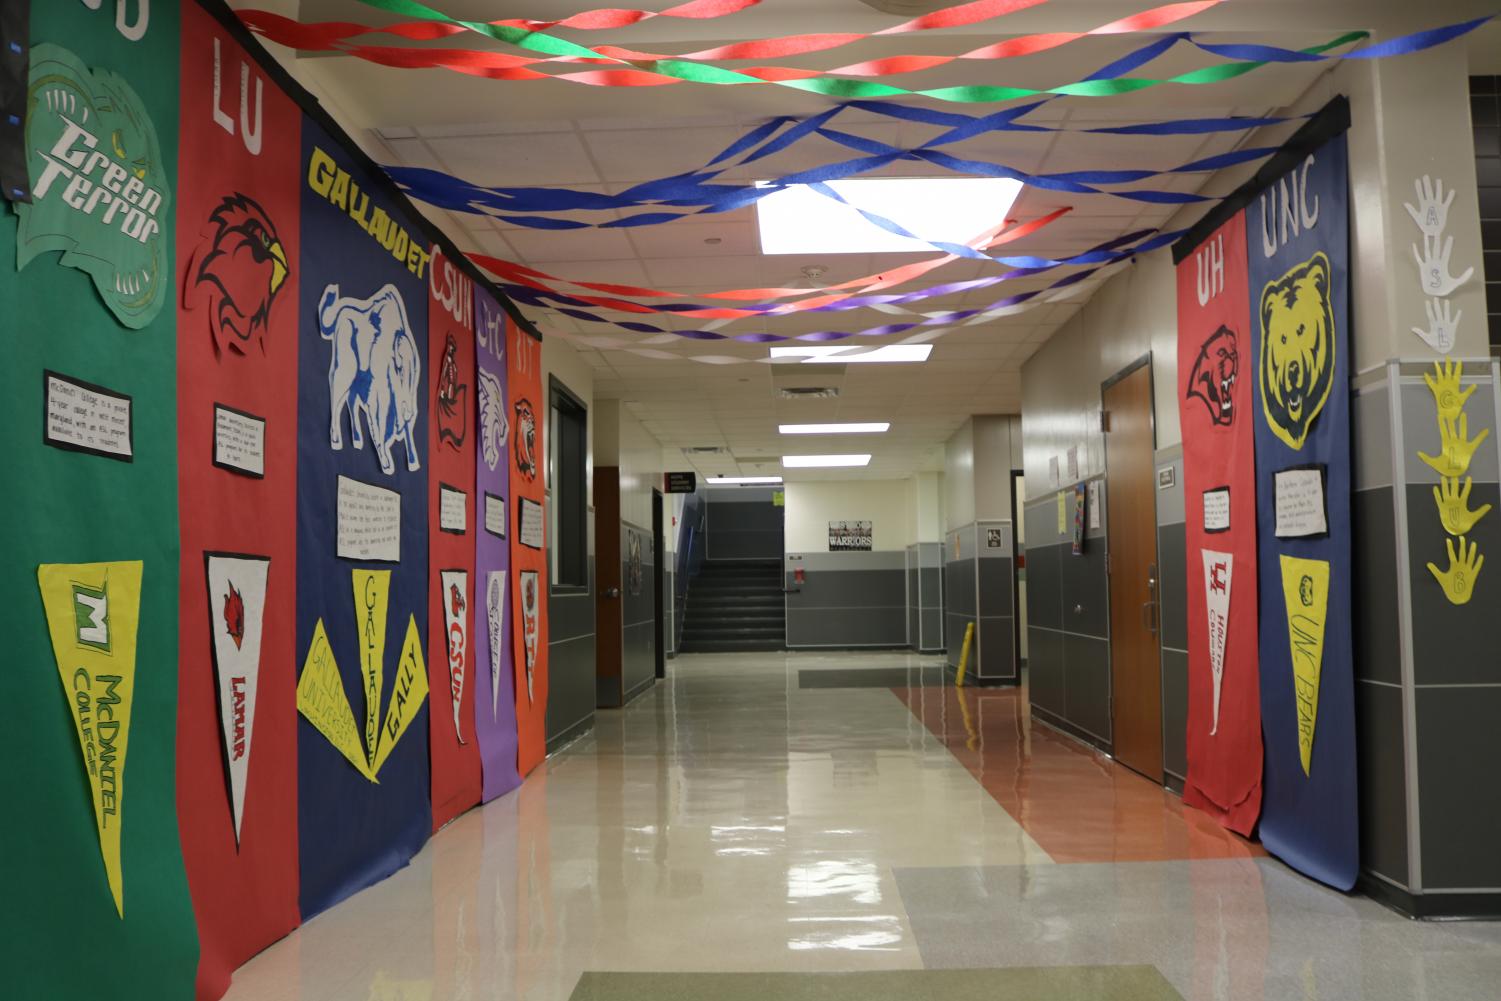 Student+Organizations+Decorate+Hallways+for+Homecoming